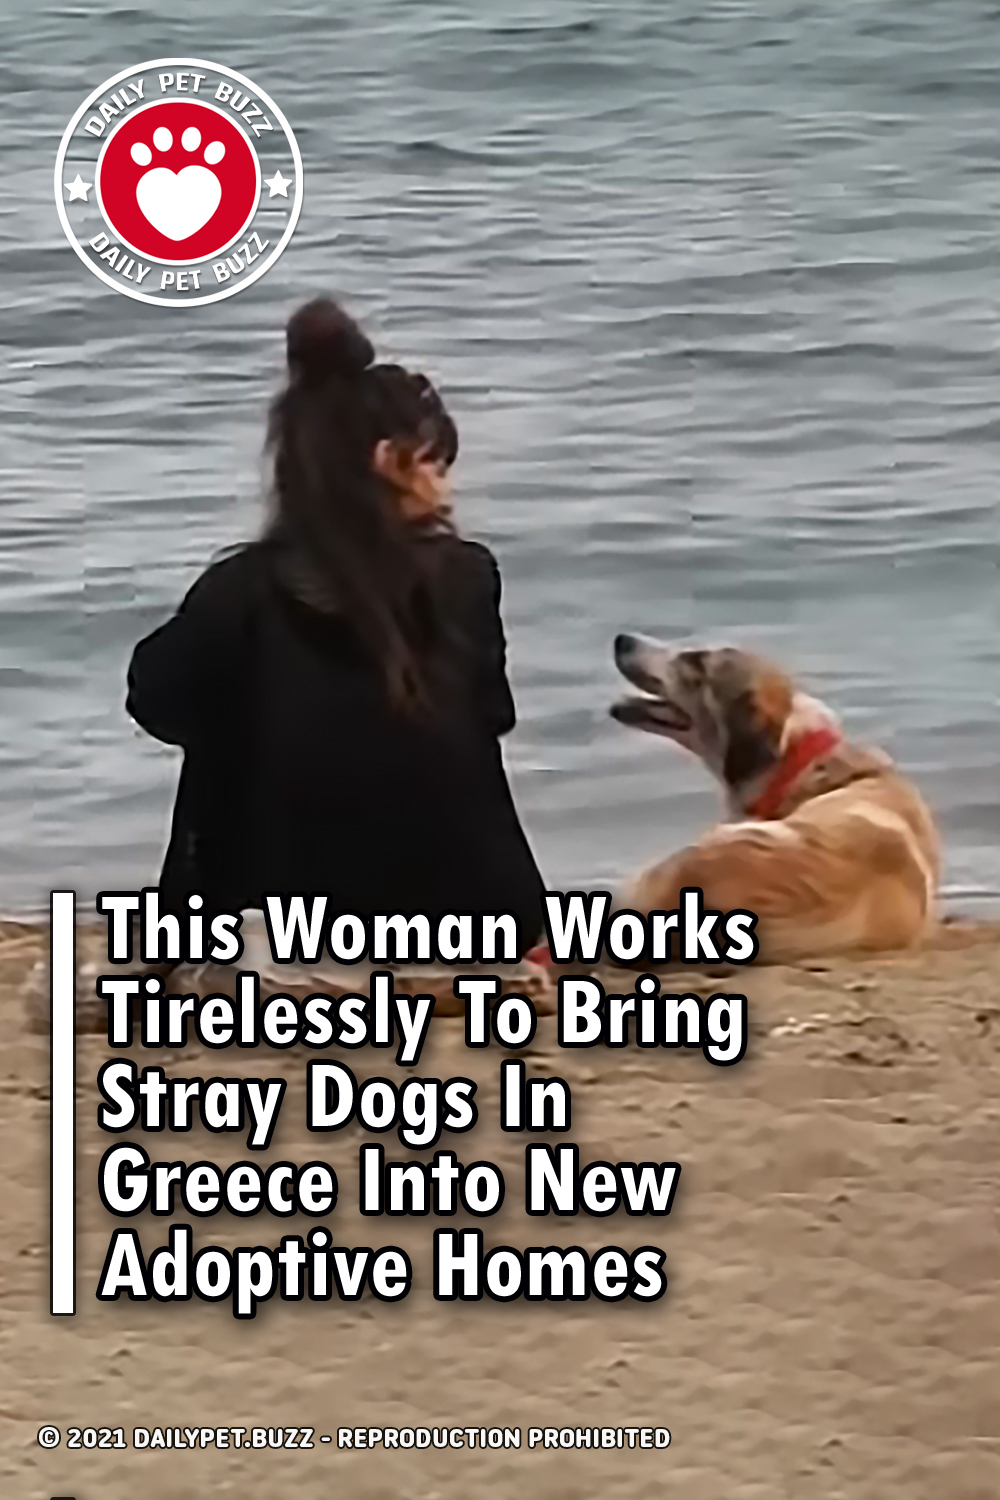 This Woman Works Tirelessly To Bring Stray Dogs In Greece Into New Adoptive Homes